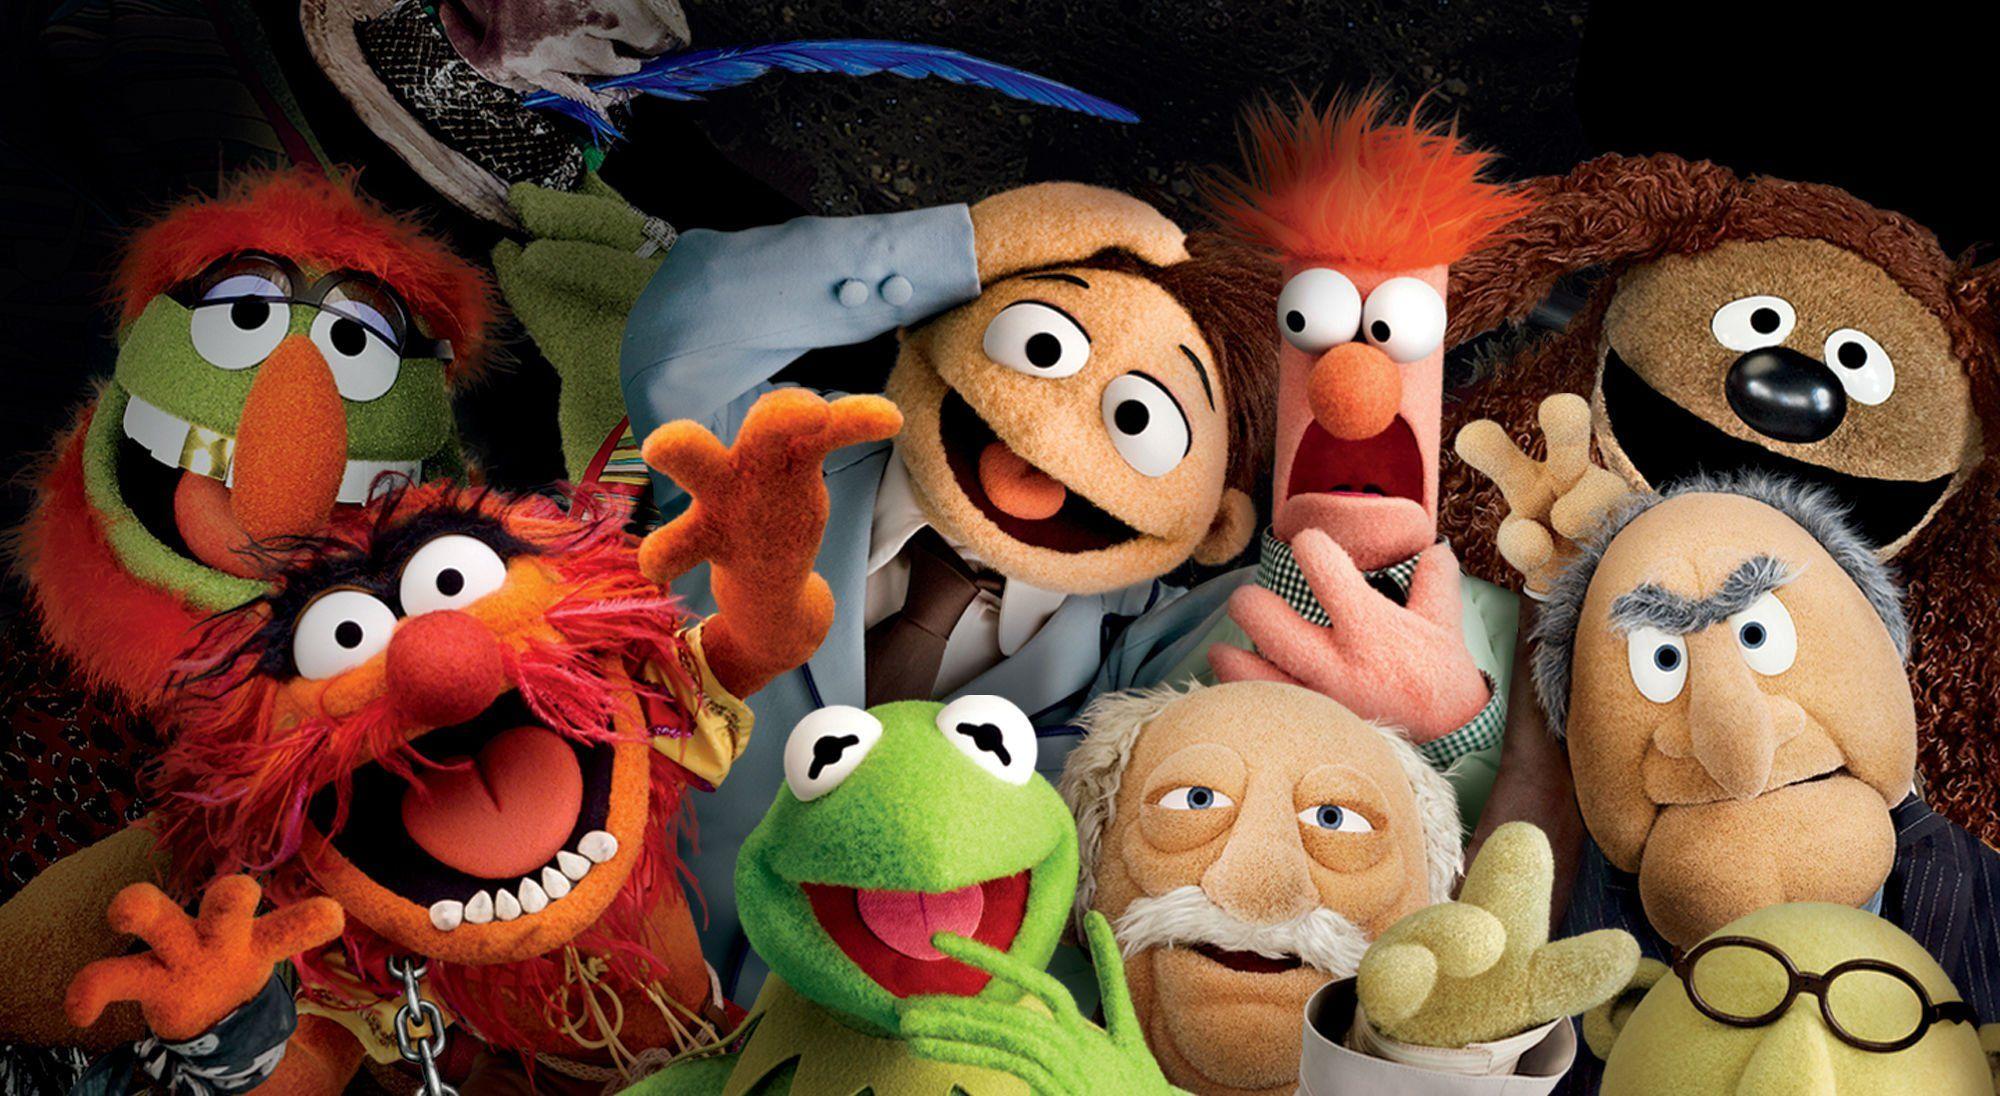 MUPPETS MOST WANTED adventure comedy crime puppet family disney